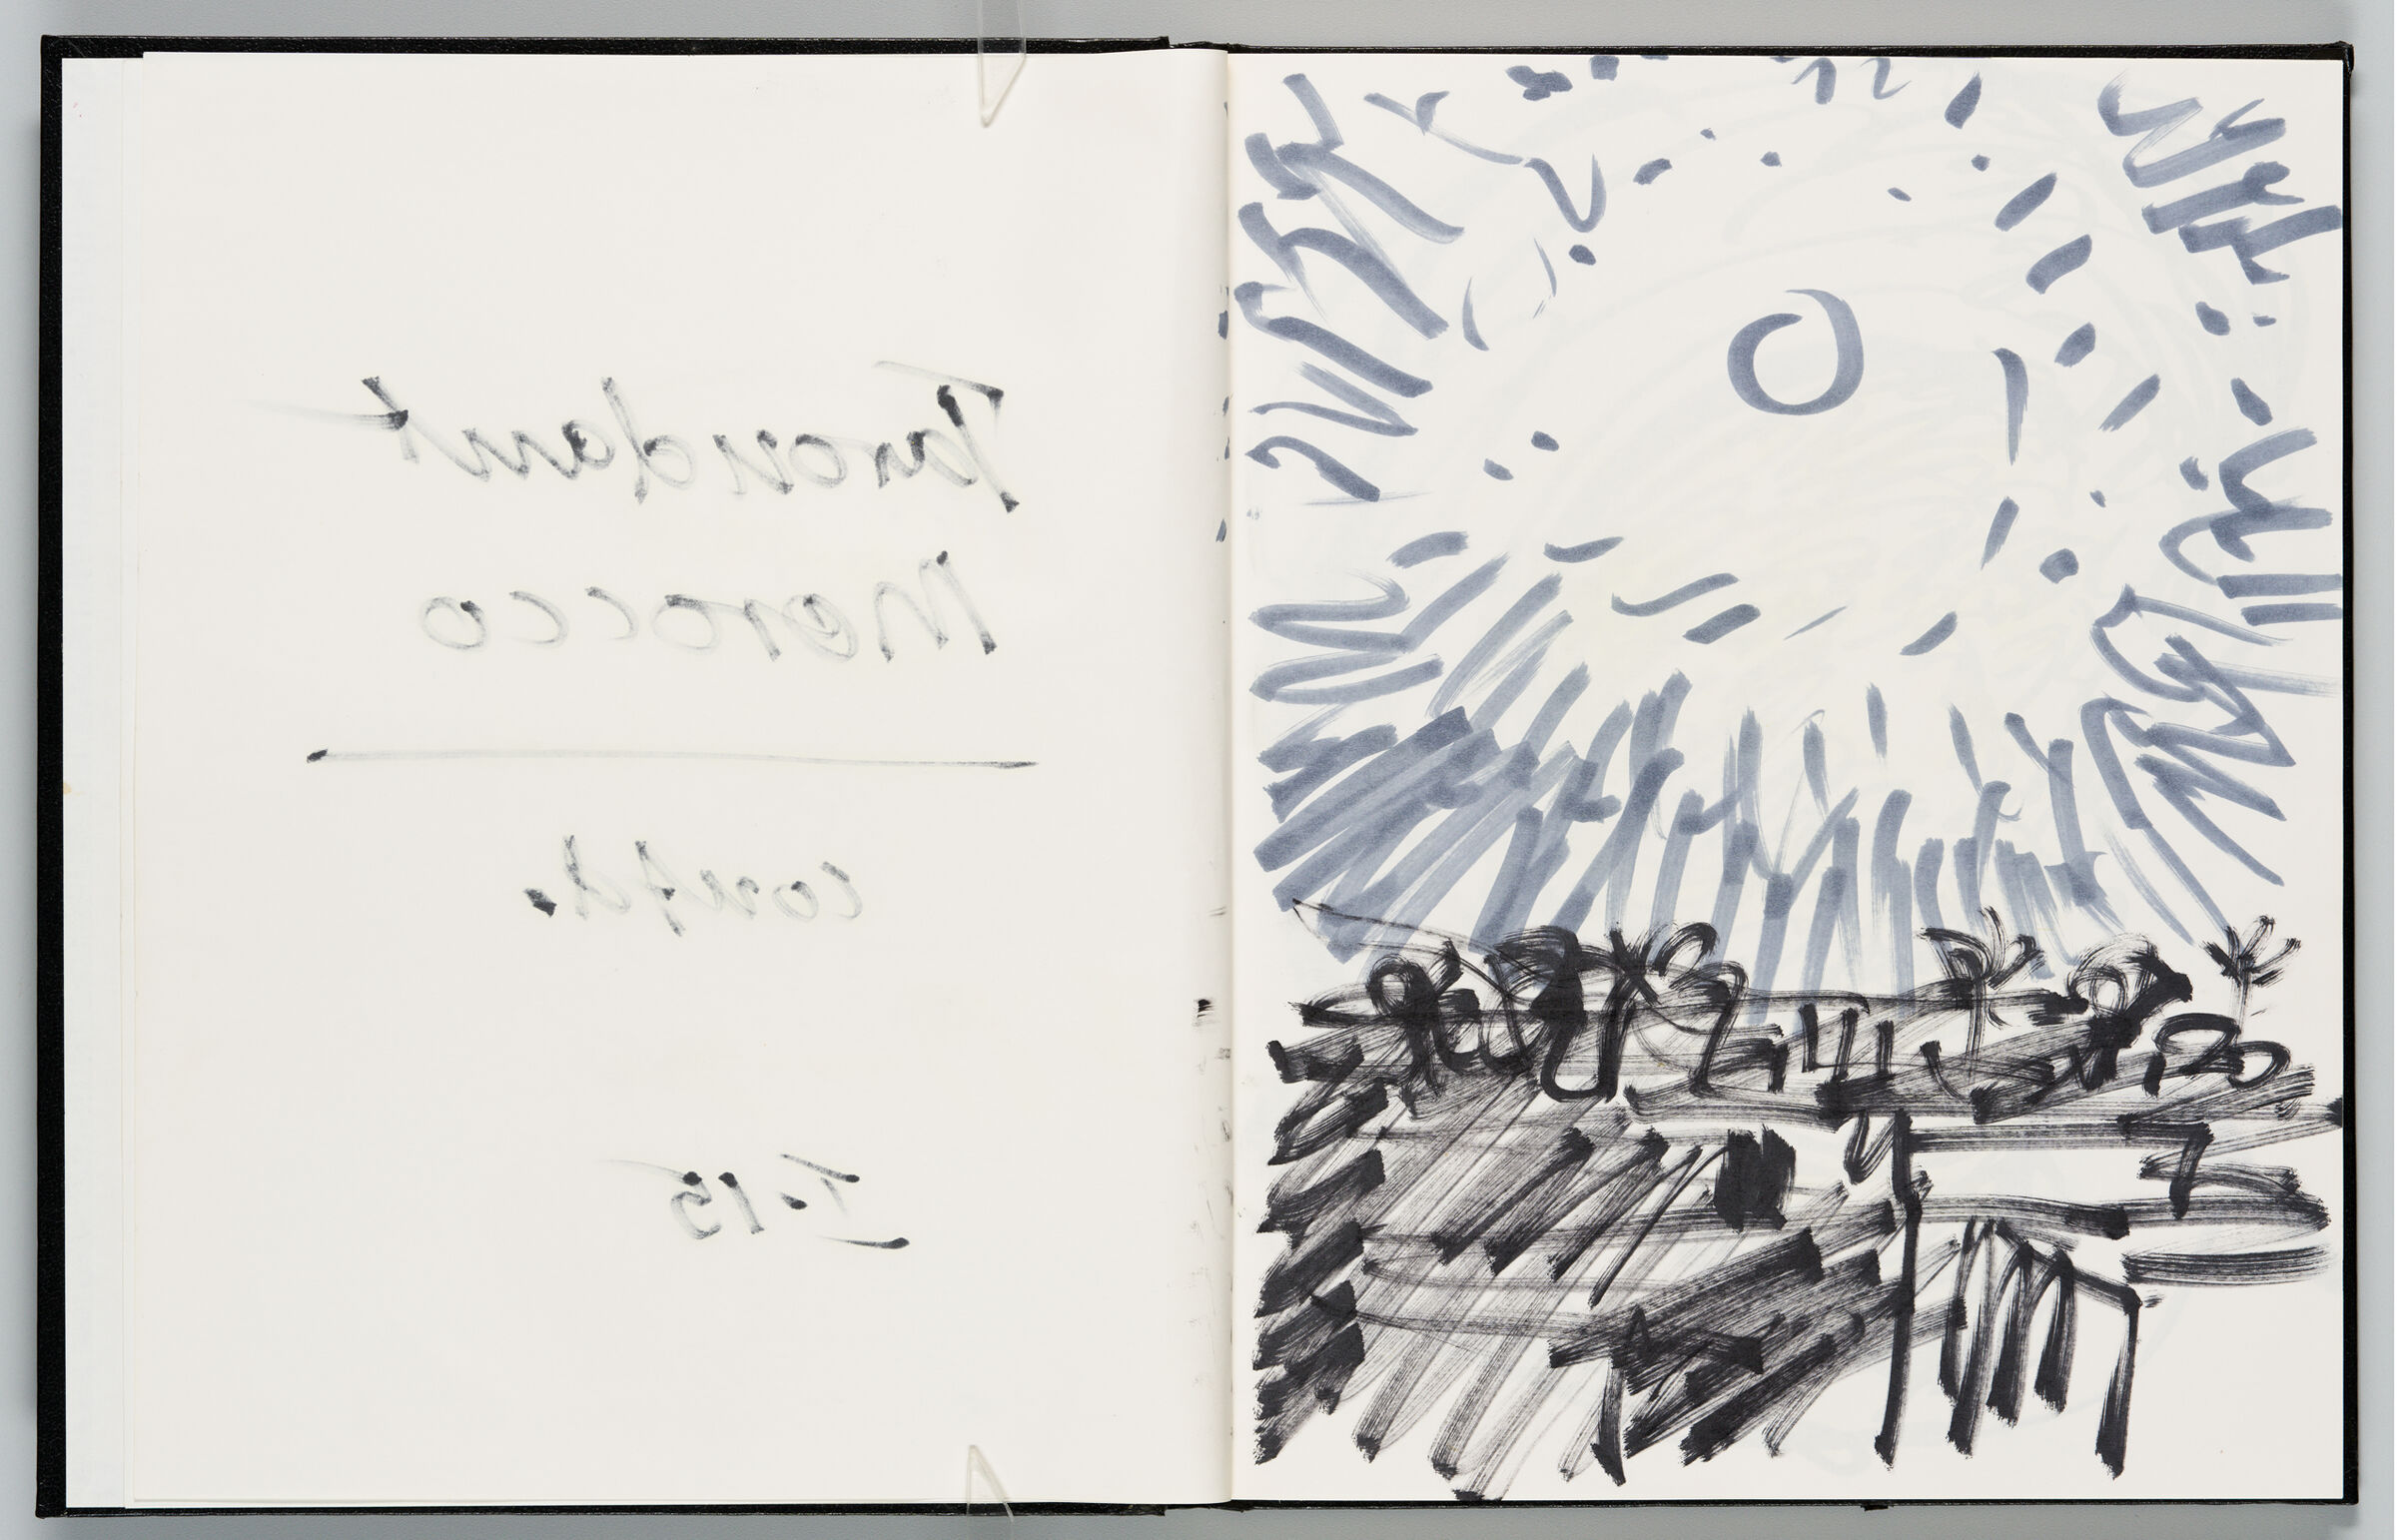 Untitled (Bleed-Through Of Previous Page, Left Page); Untitled (Taroundant Landscape, Right Page)